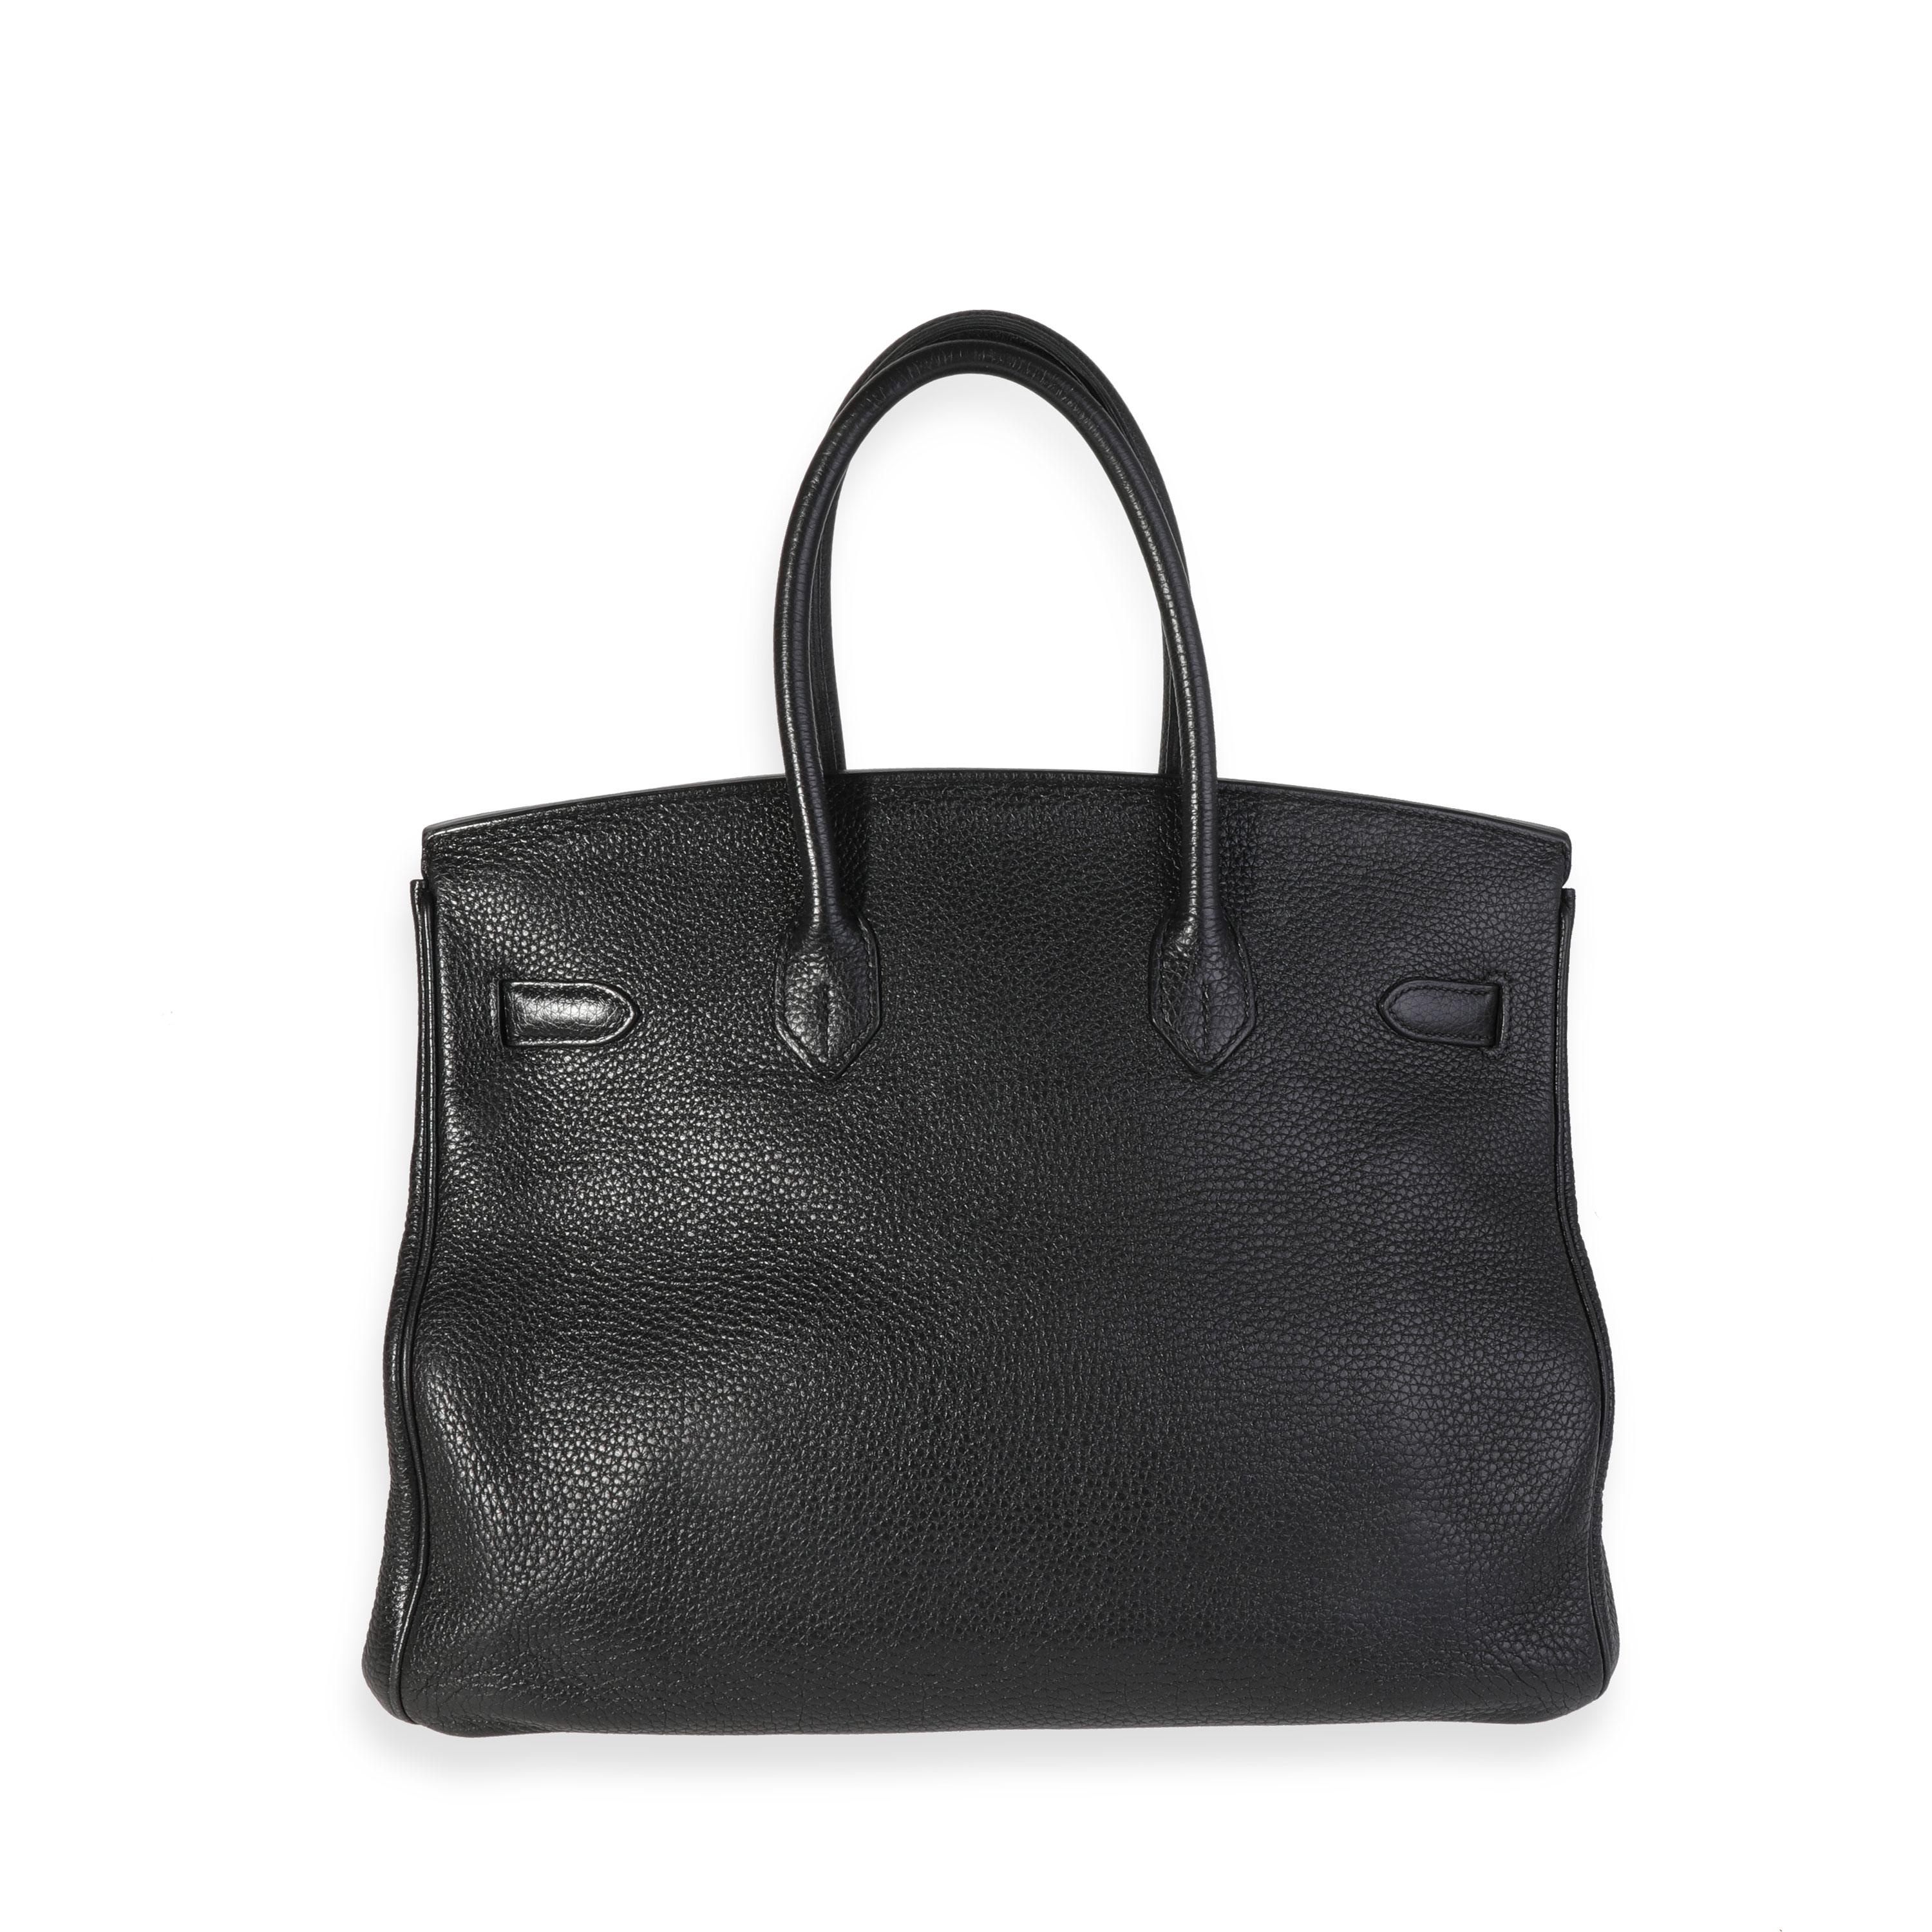 Listing Title: Hermès Black Togo Birkin 35 GHW
SKU: 119491
Condition: Pre-owned (3000)
Handbag Condition: Very Good
Condition Comments: Very Good Condition. Scuffing to corners. Scratching and tarnishing to hardware. Scuffing, marks and indentations